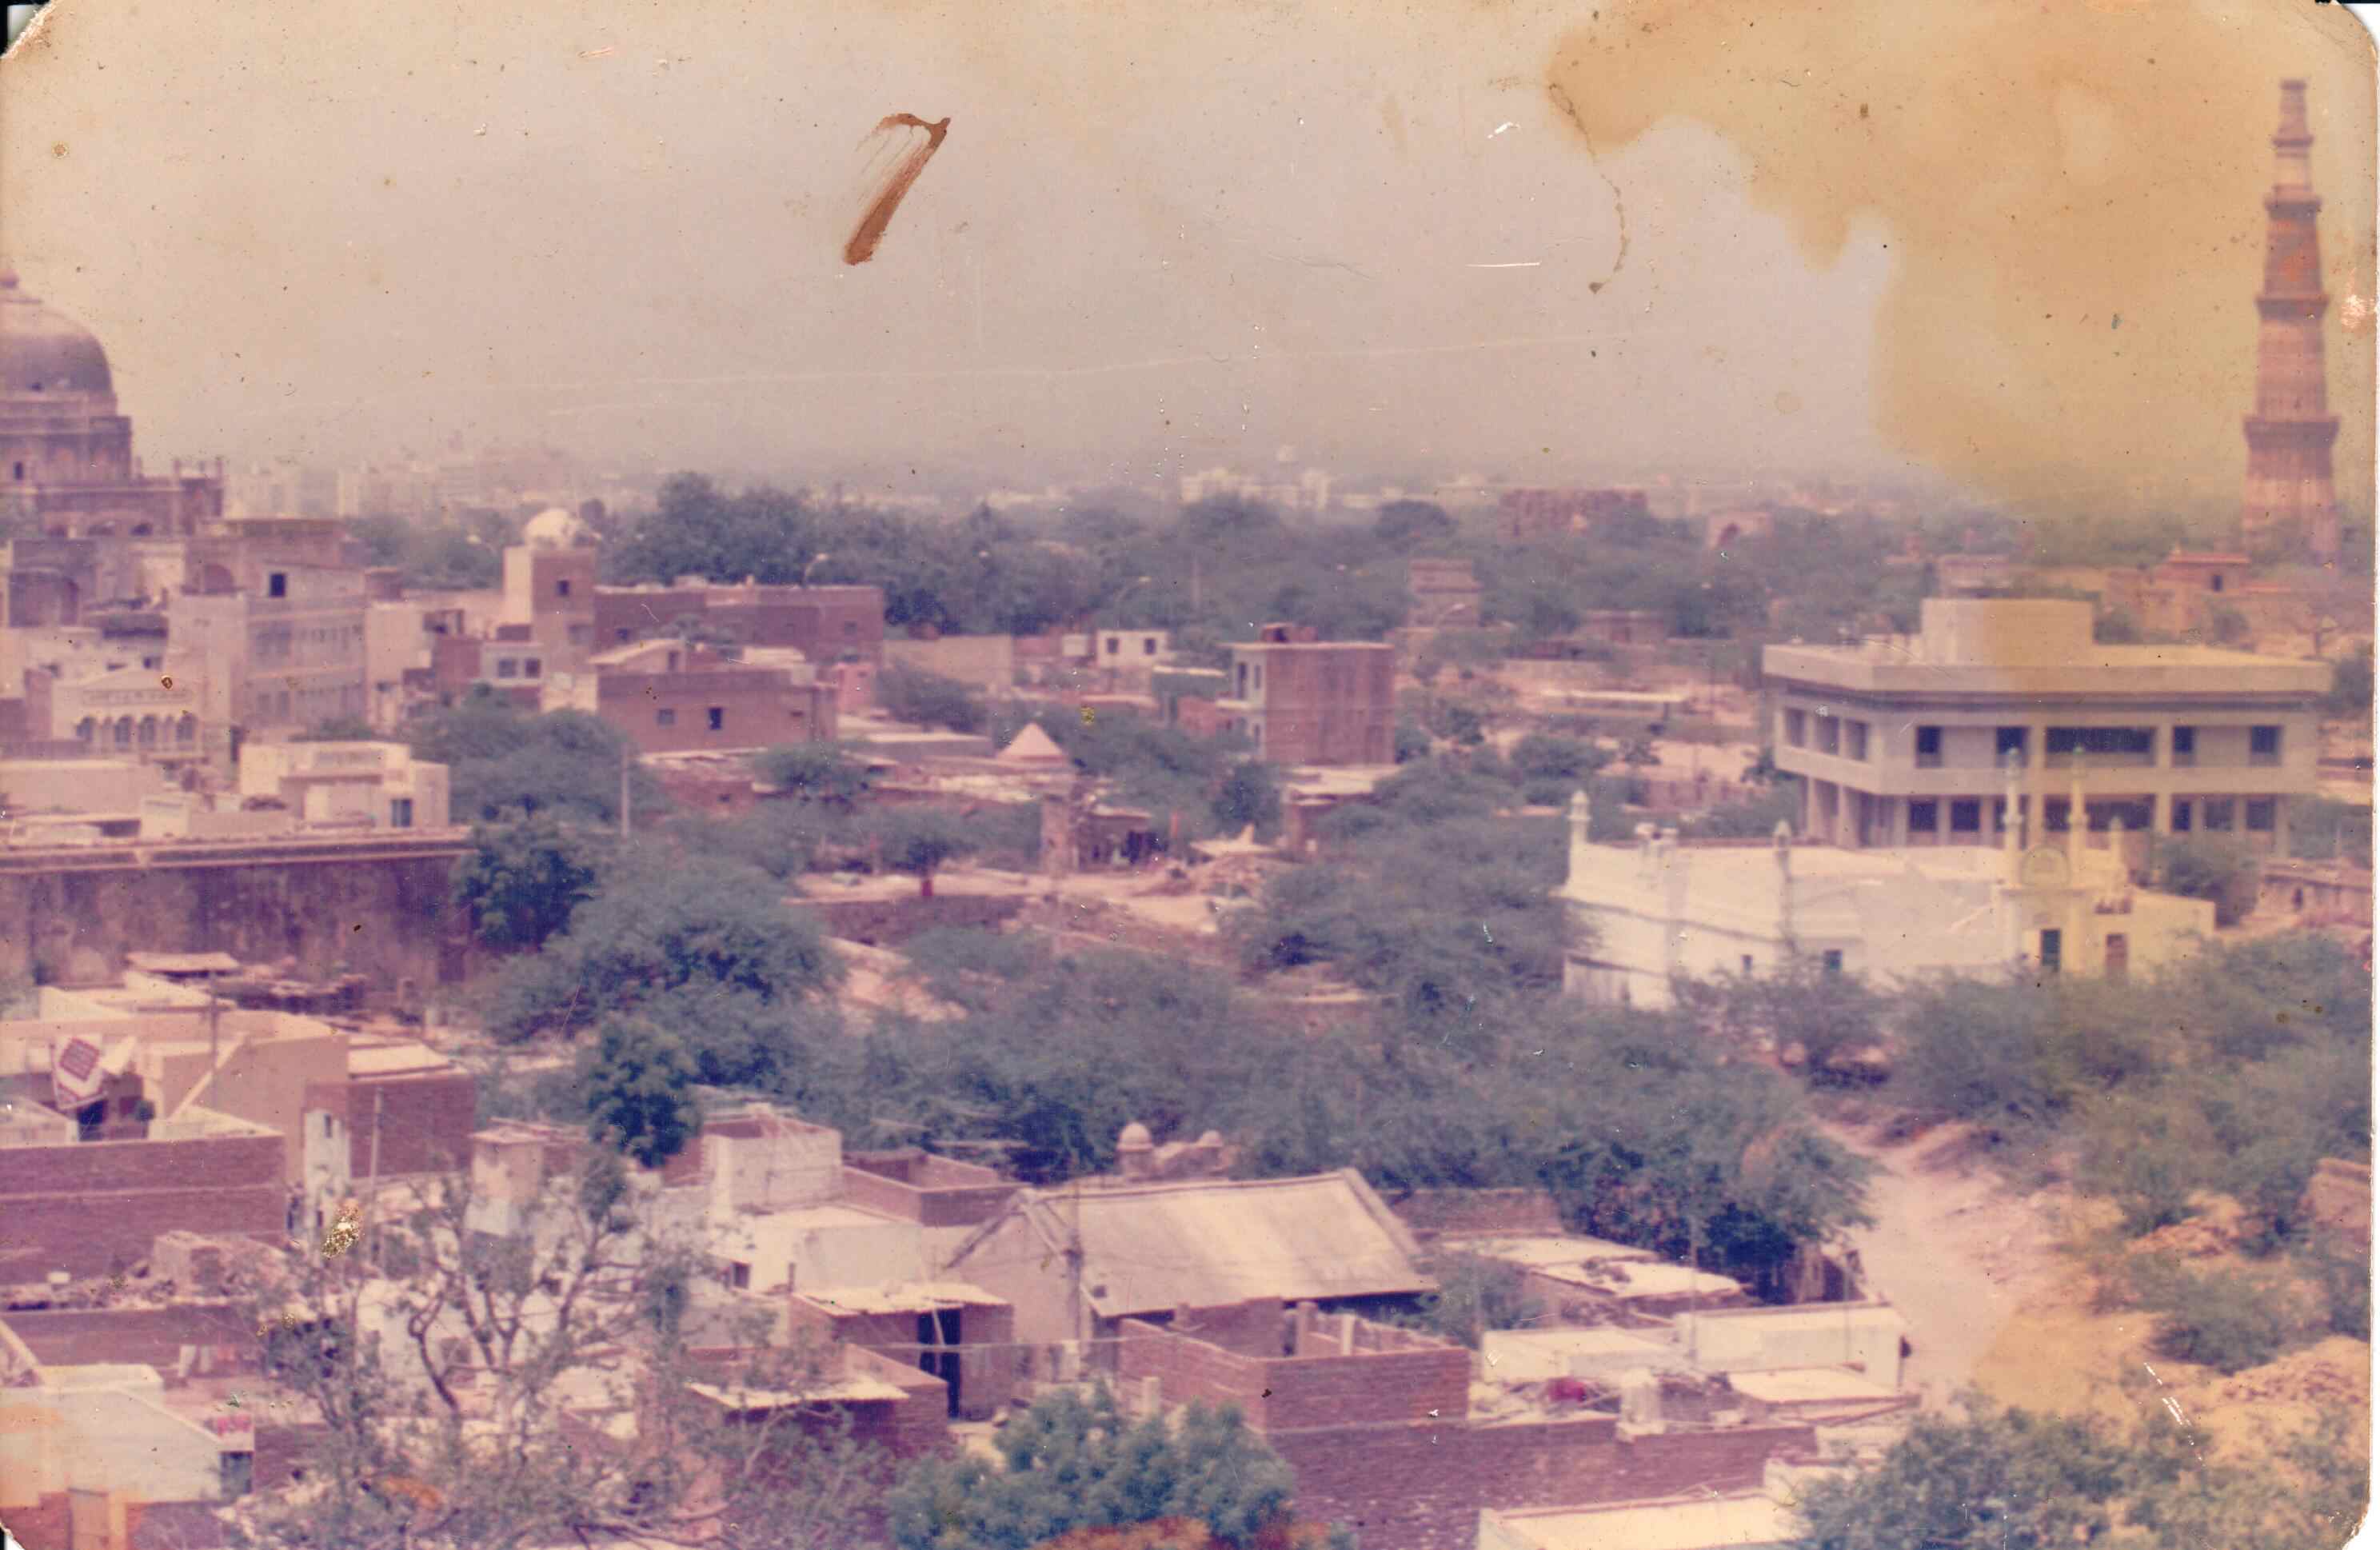 A View of Mehrauli without Hi-rises, late 1990s. Photo Courtesy Mohammad Anwar